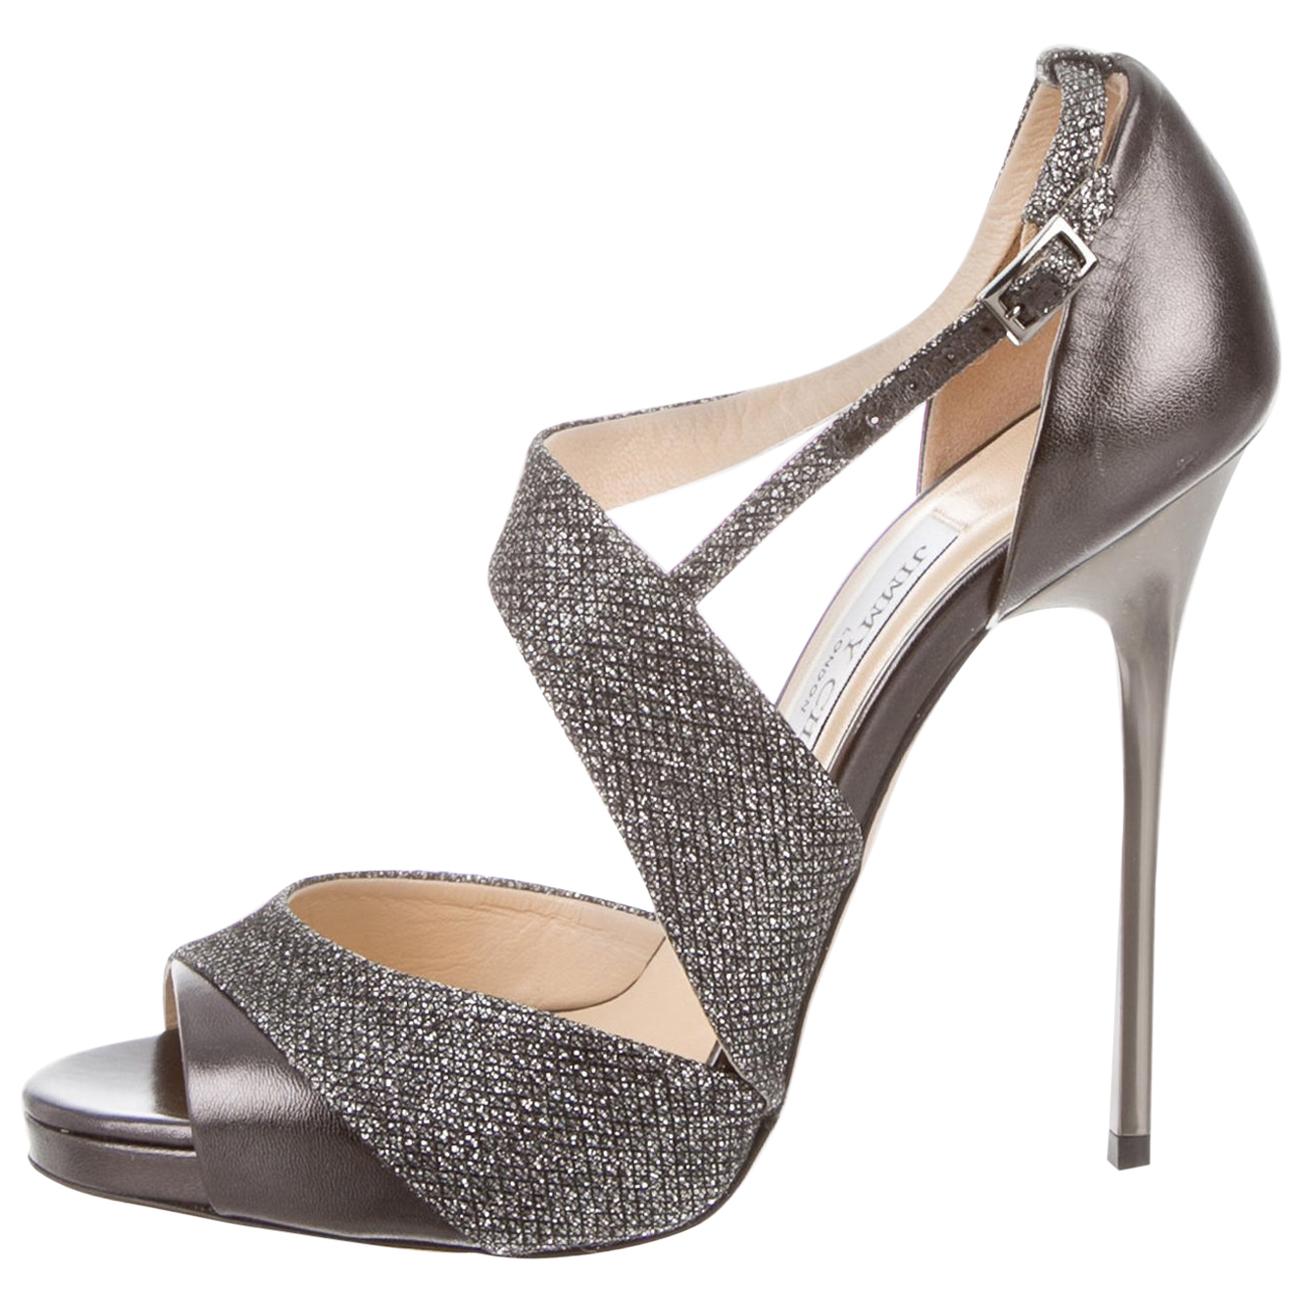 Jimmy Choo NEW Silver Leather Glitter Strappy Evening Sandals Heels in Box